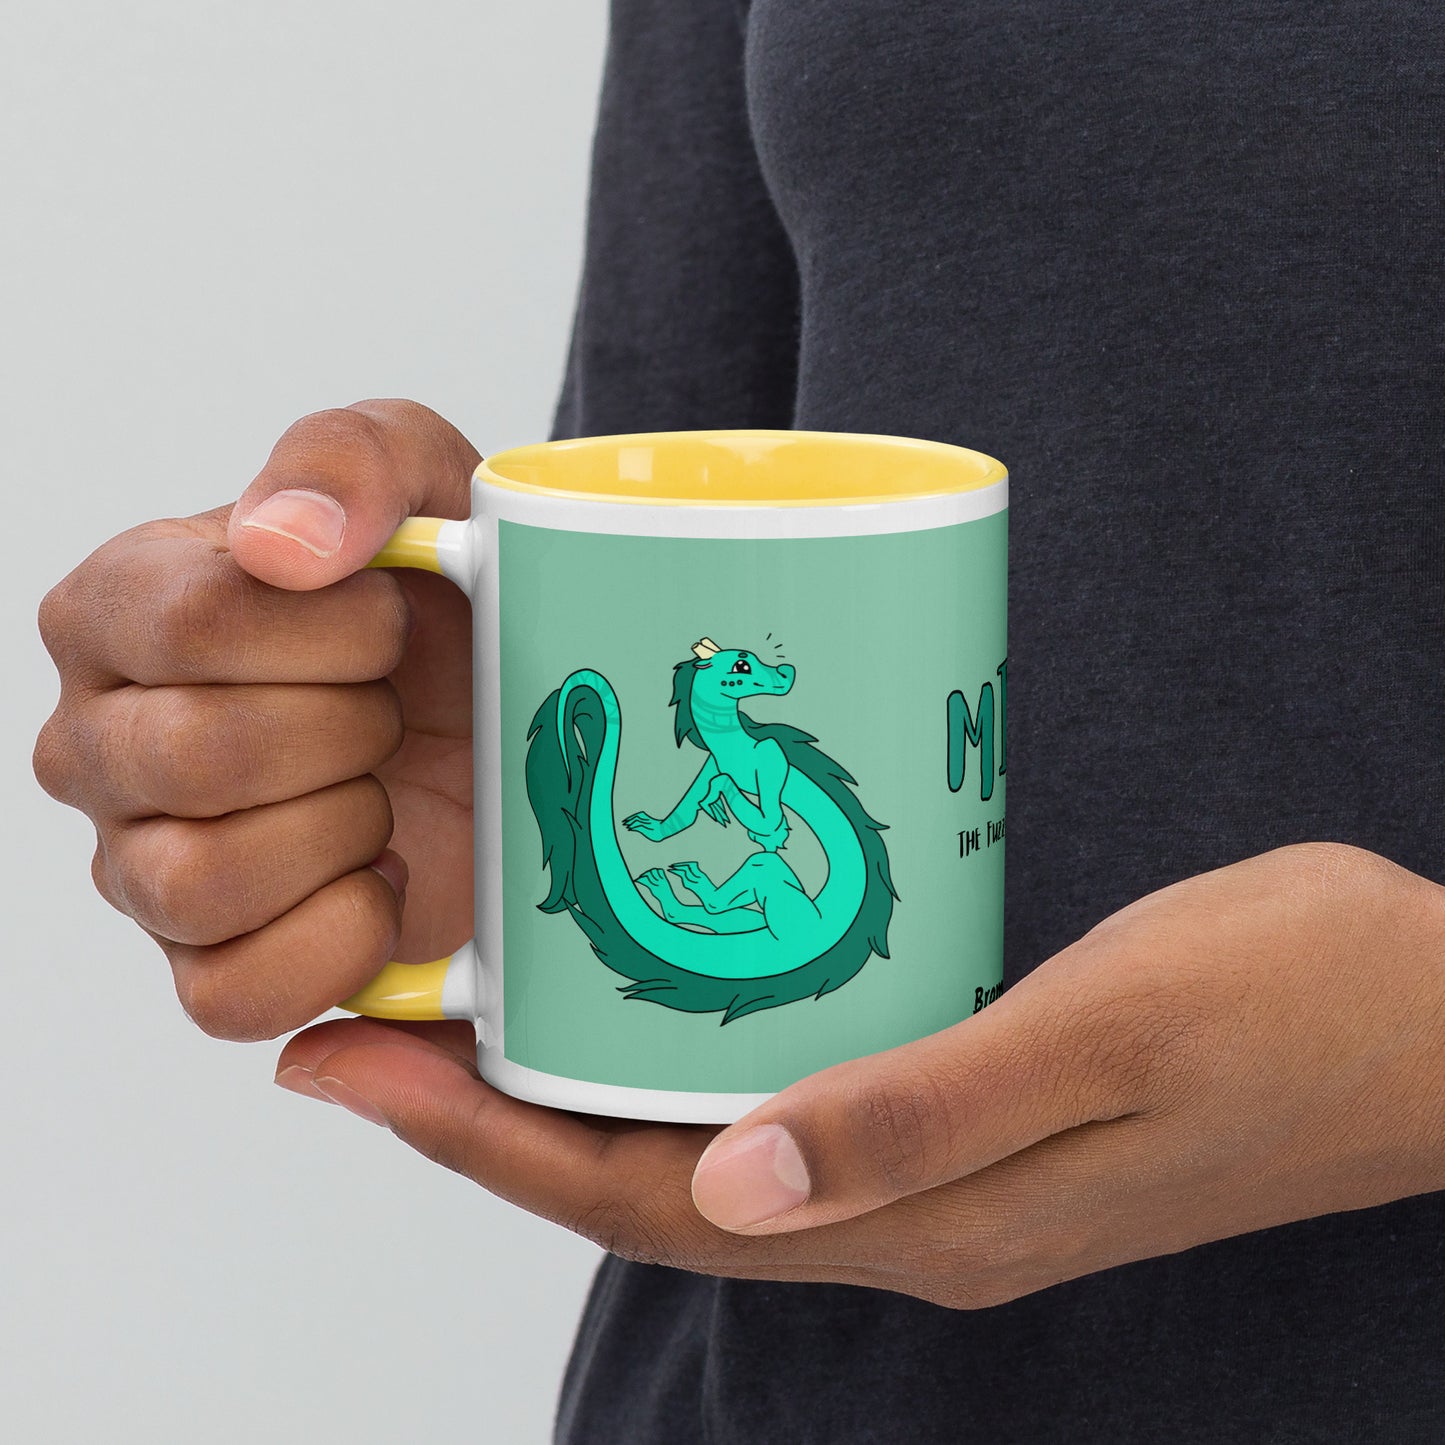 11 ounce white ceramic mug. Yellow inside and handle. Features double-sided image of Minty the Fuzzy Noodle Dragon on a green background. Shown in model's hands.